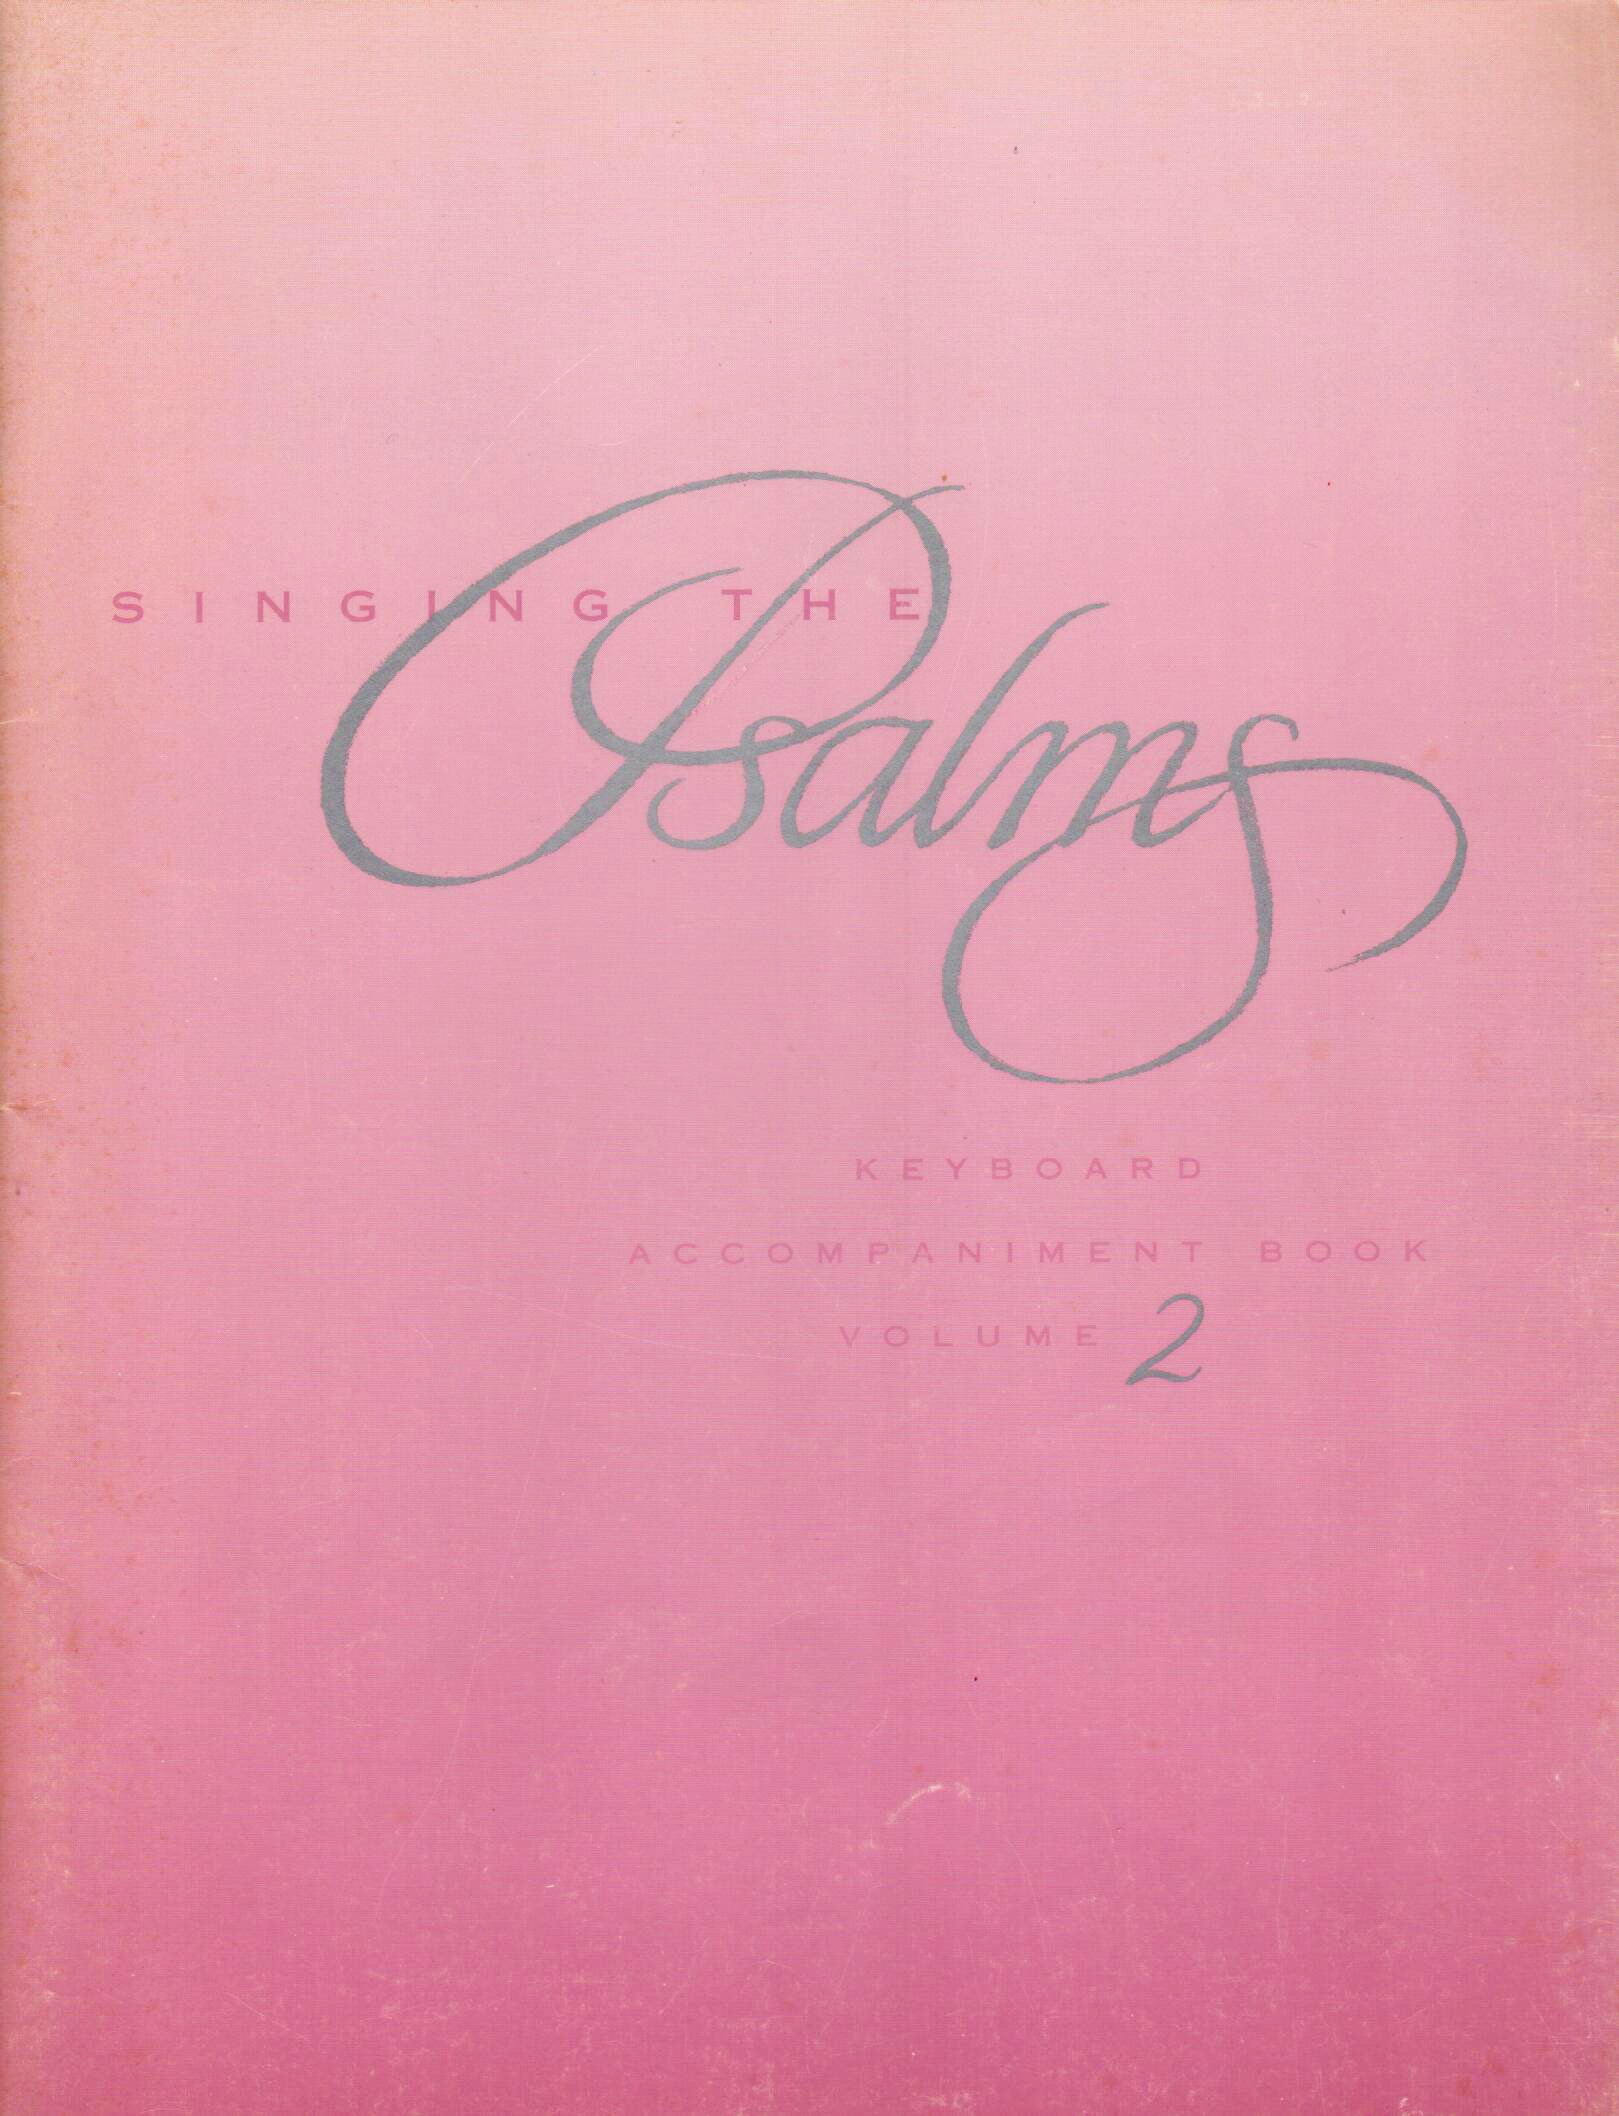 Cover of Singing the Psalms